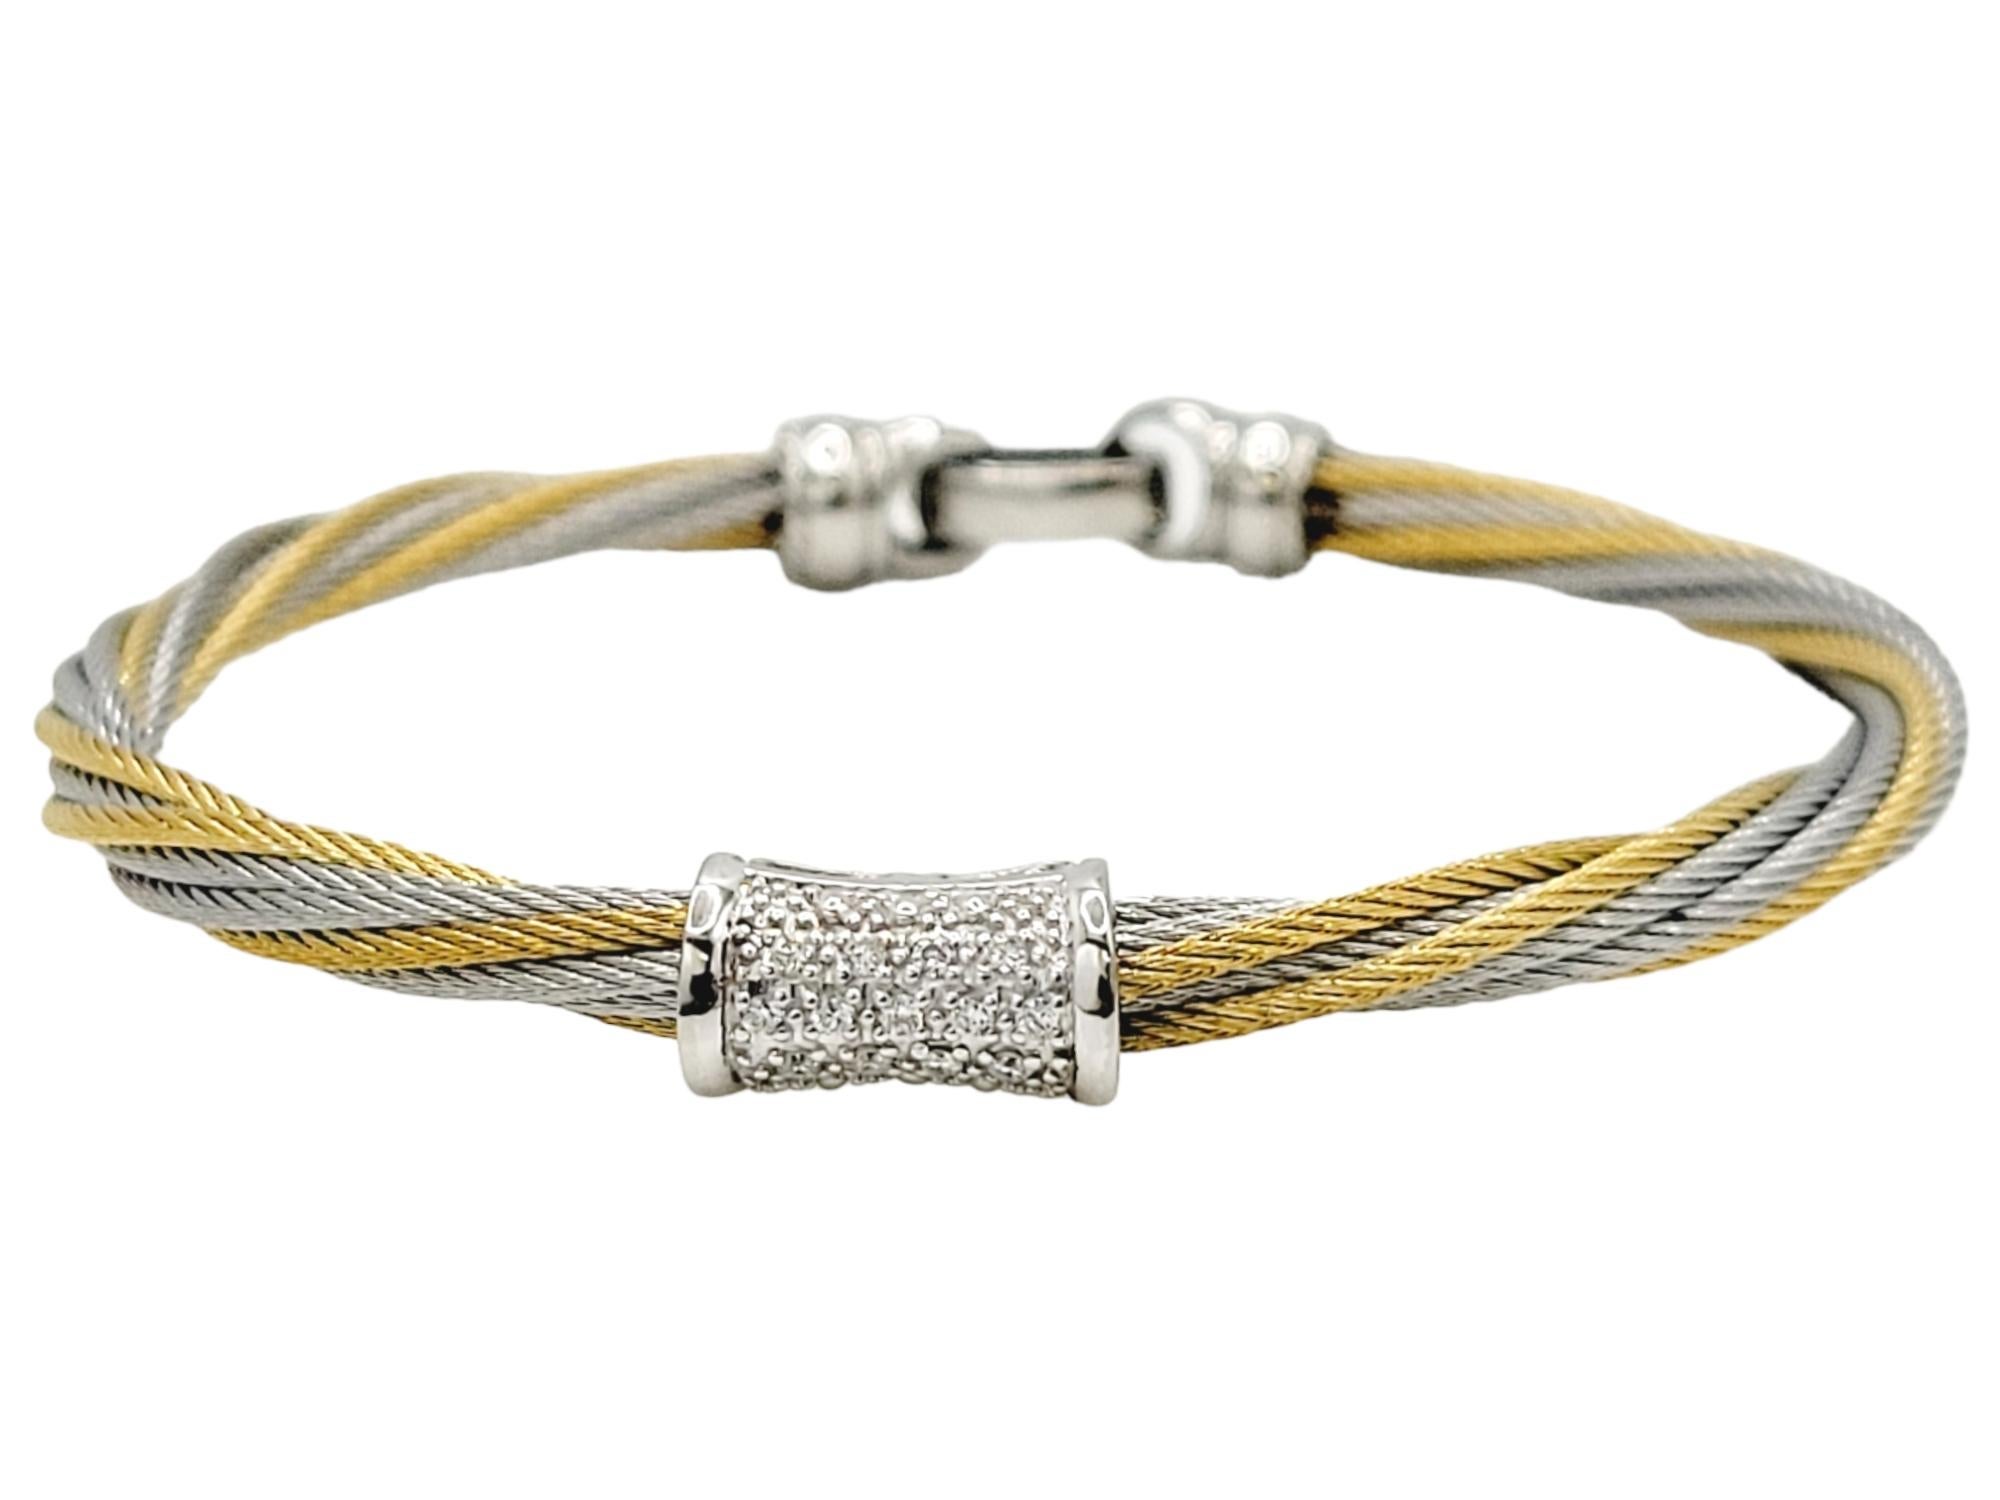 Introducing an exquisite Charriol Classique Bracelet, a testament to timeless elegance and impeccable craftsmanship. This stunning piece is expertly crafted with a blend of 18-karat yellow and white gold and durable stainless steel, creating a